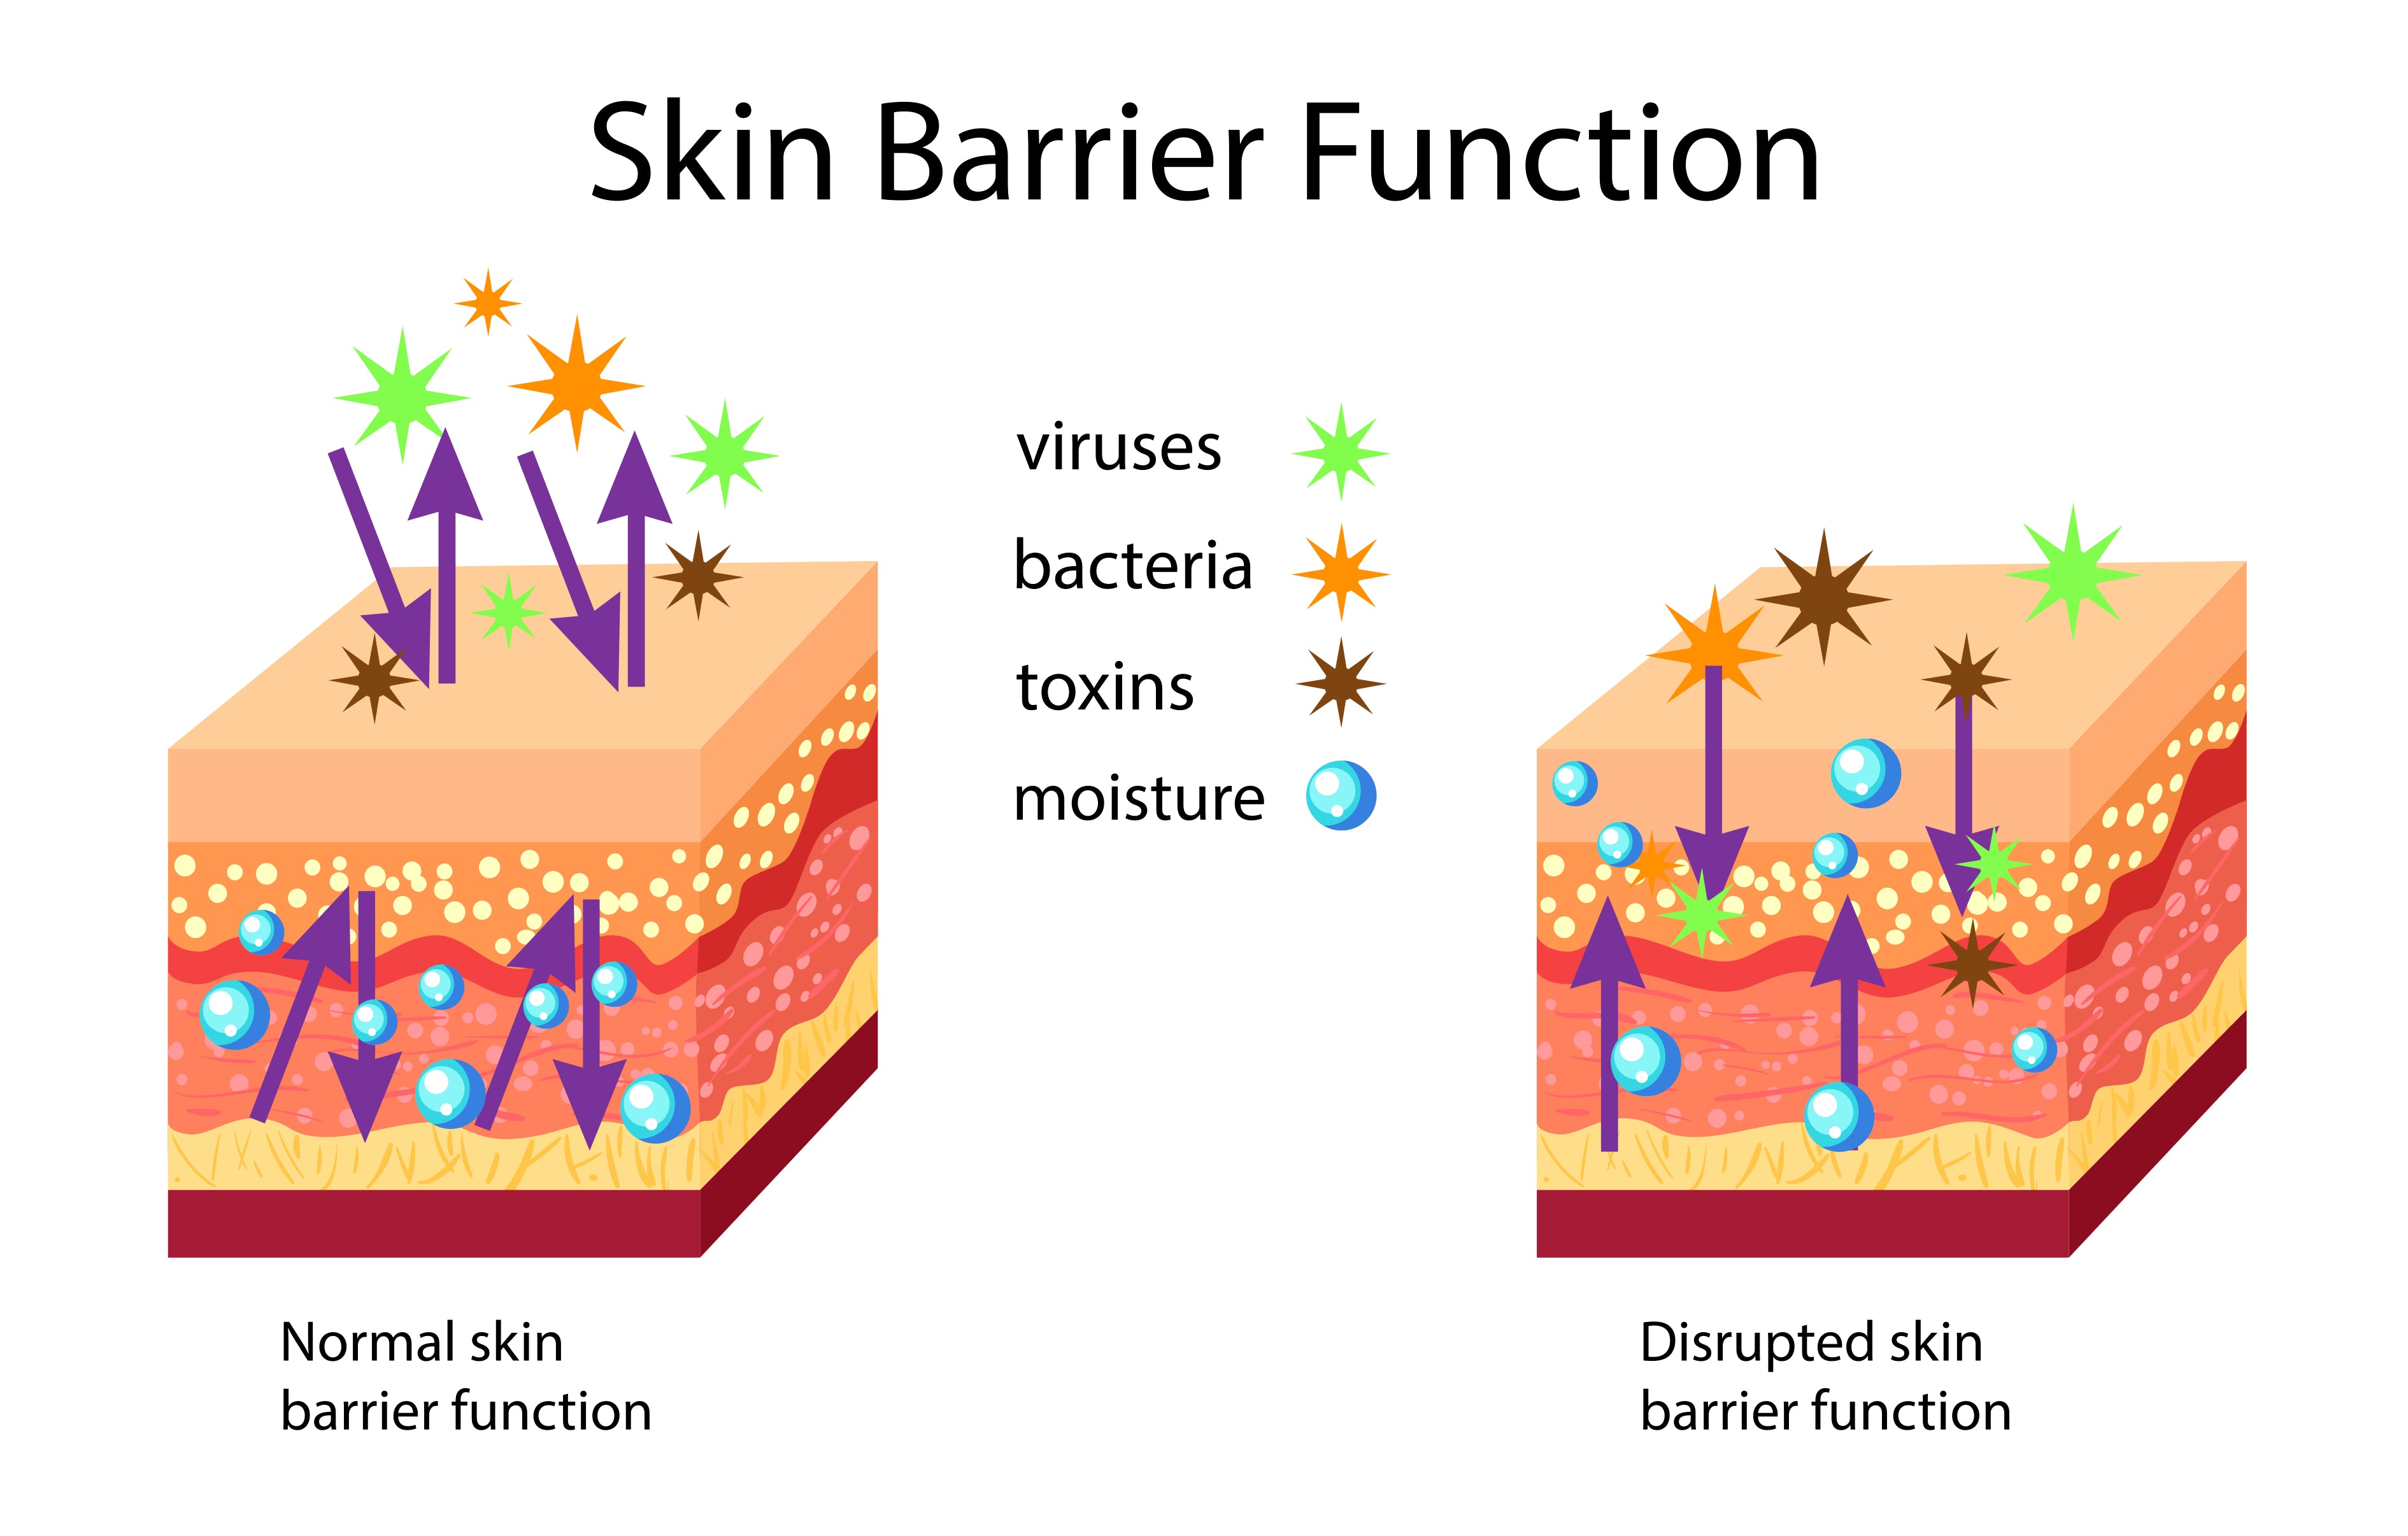 Product to Improve Skin Barrier Function